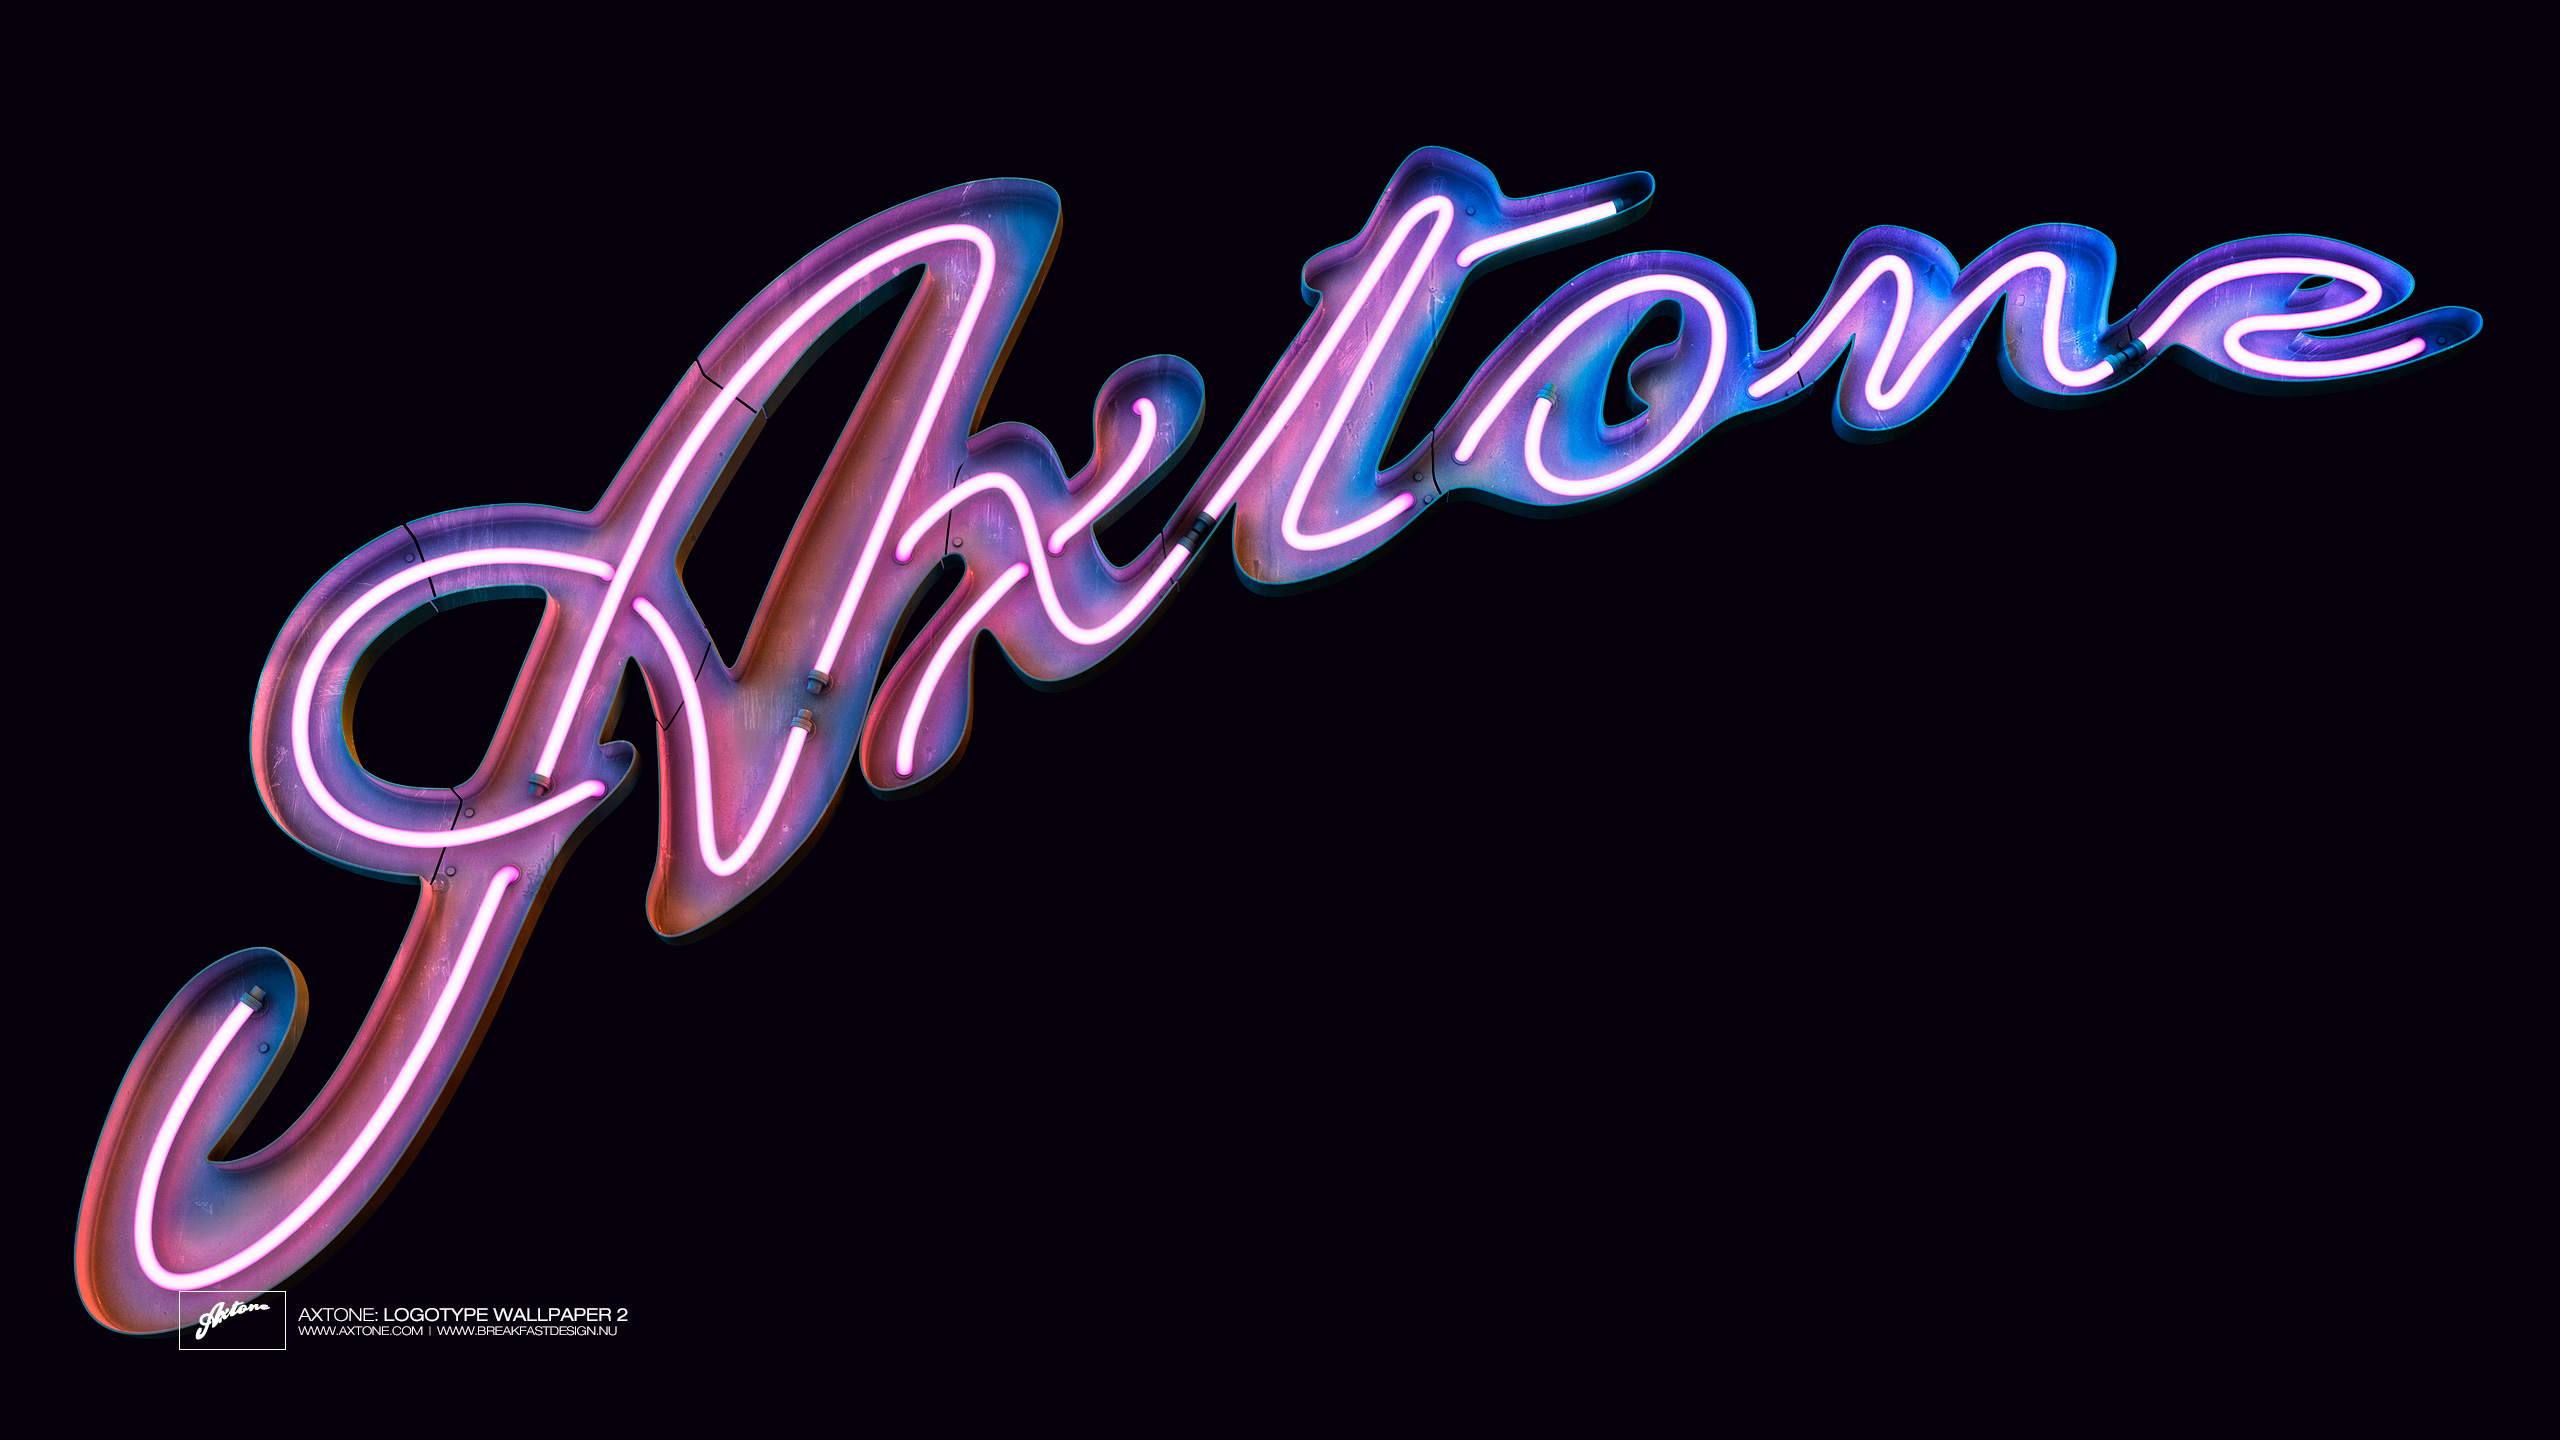 Axtone Wallpapers